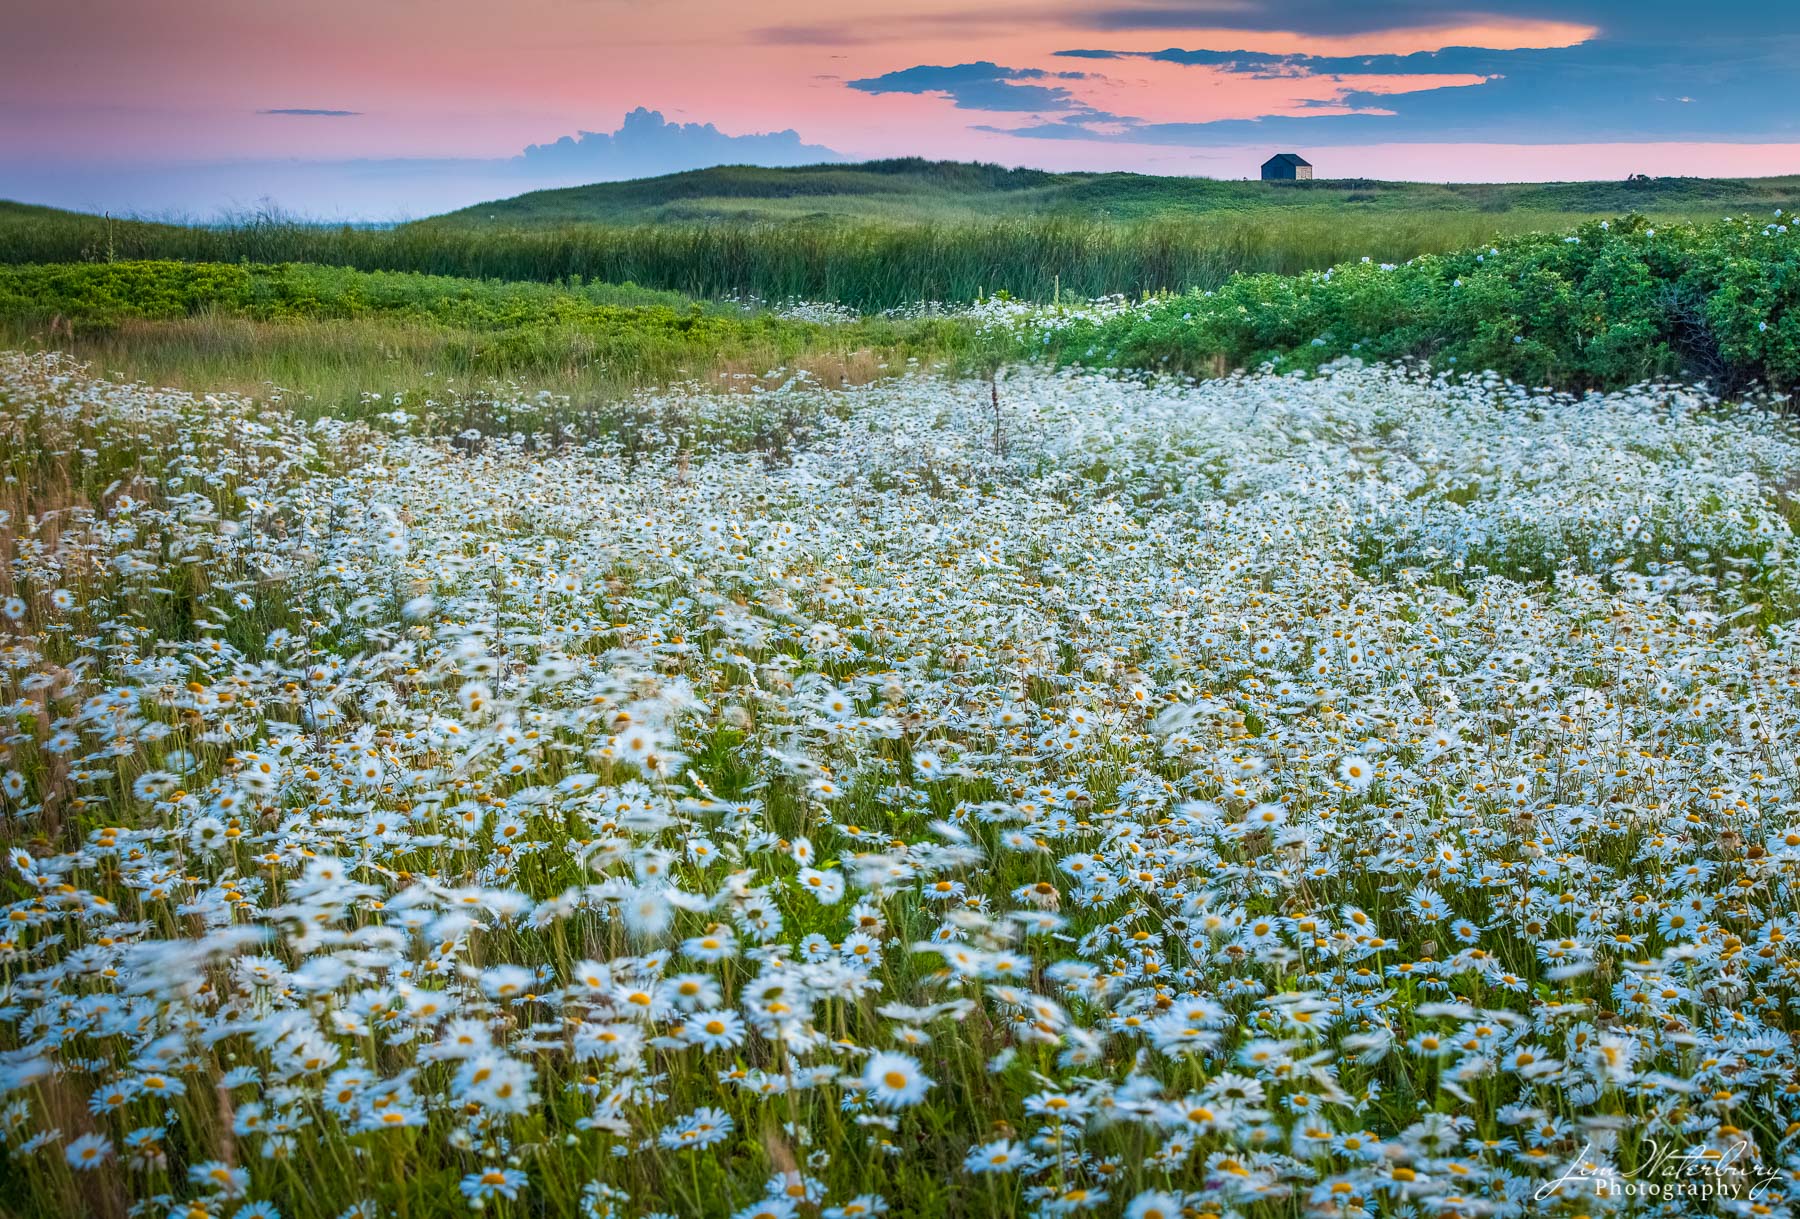 Wild daisies blow in the wind near Miacomet pond, Nantucket.